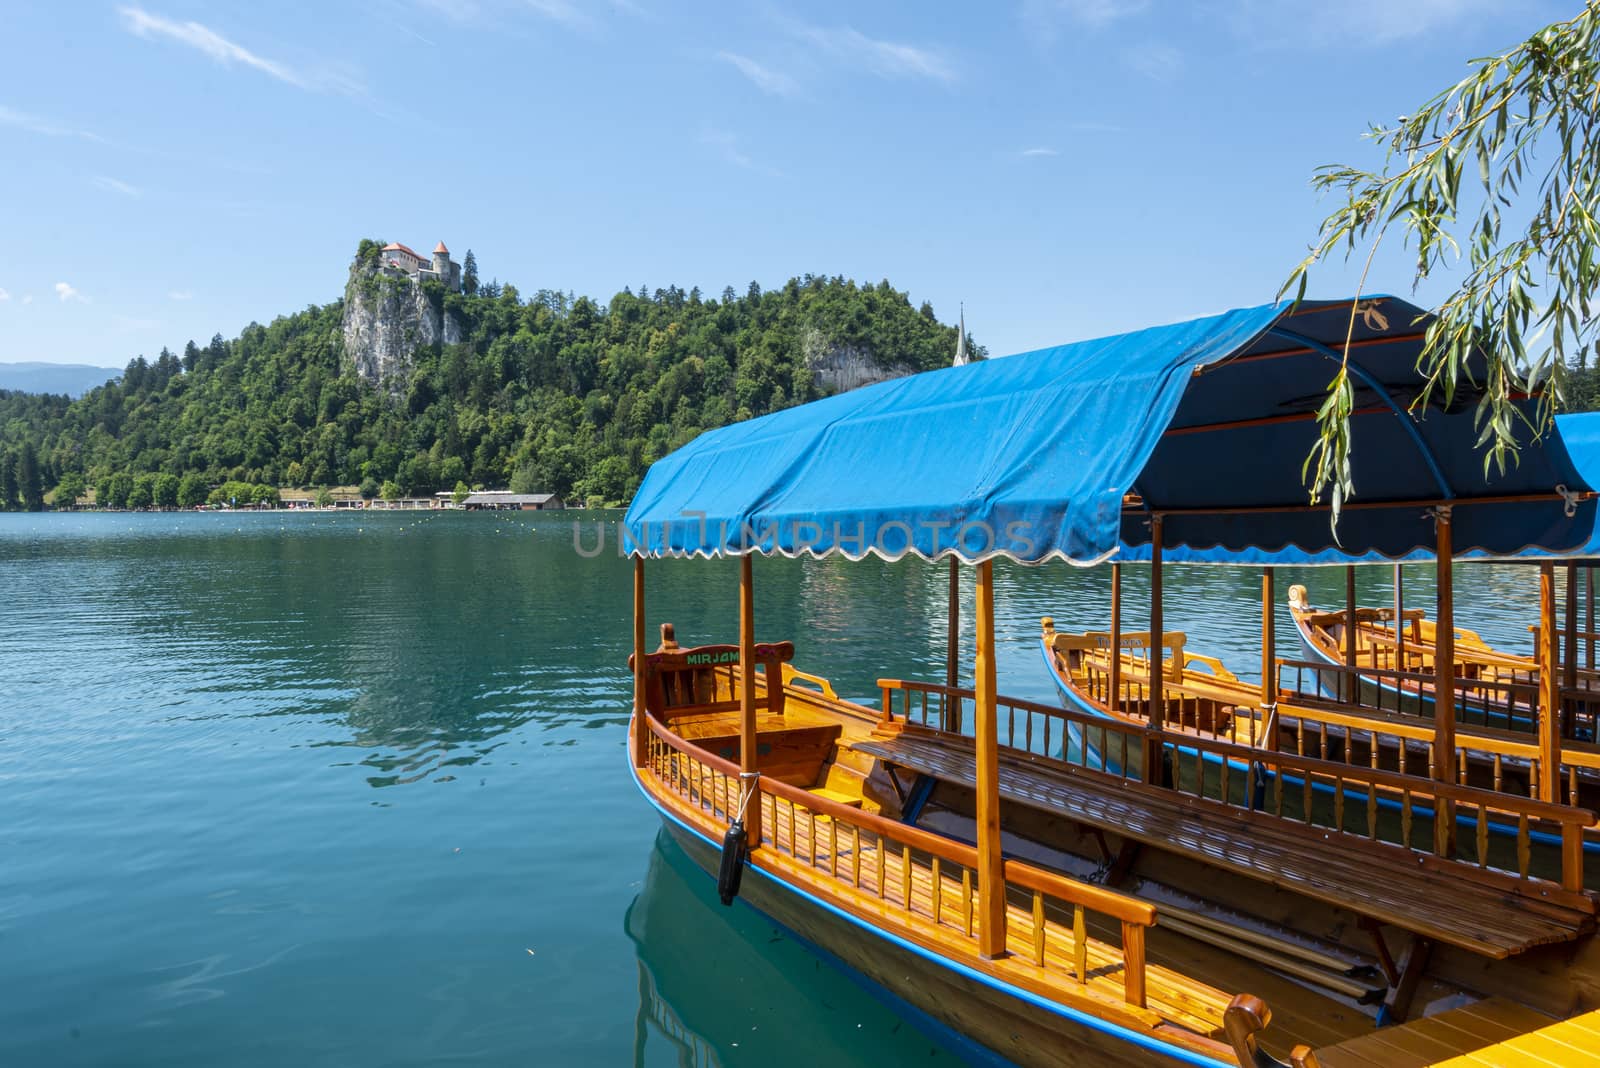 the characteristic boats on the lake with the castle in the background in Bled, Slovenia